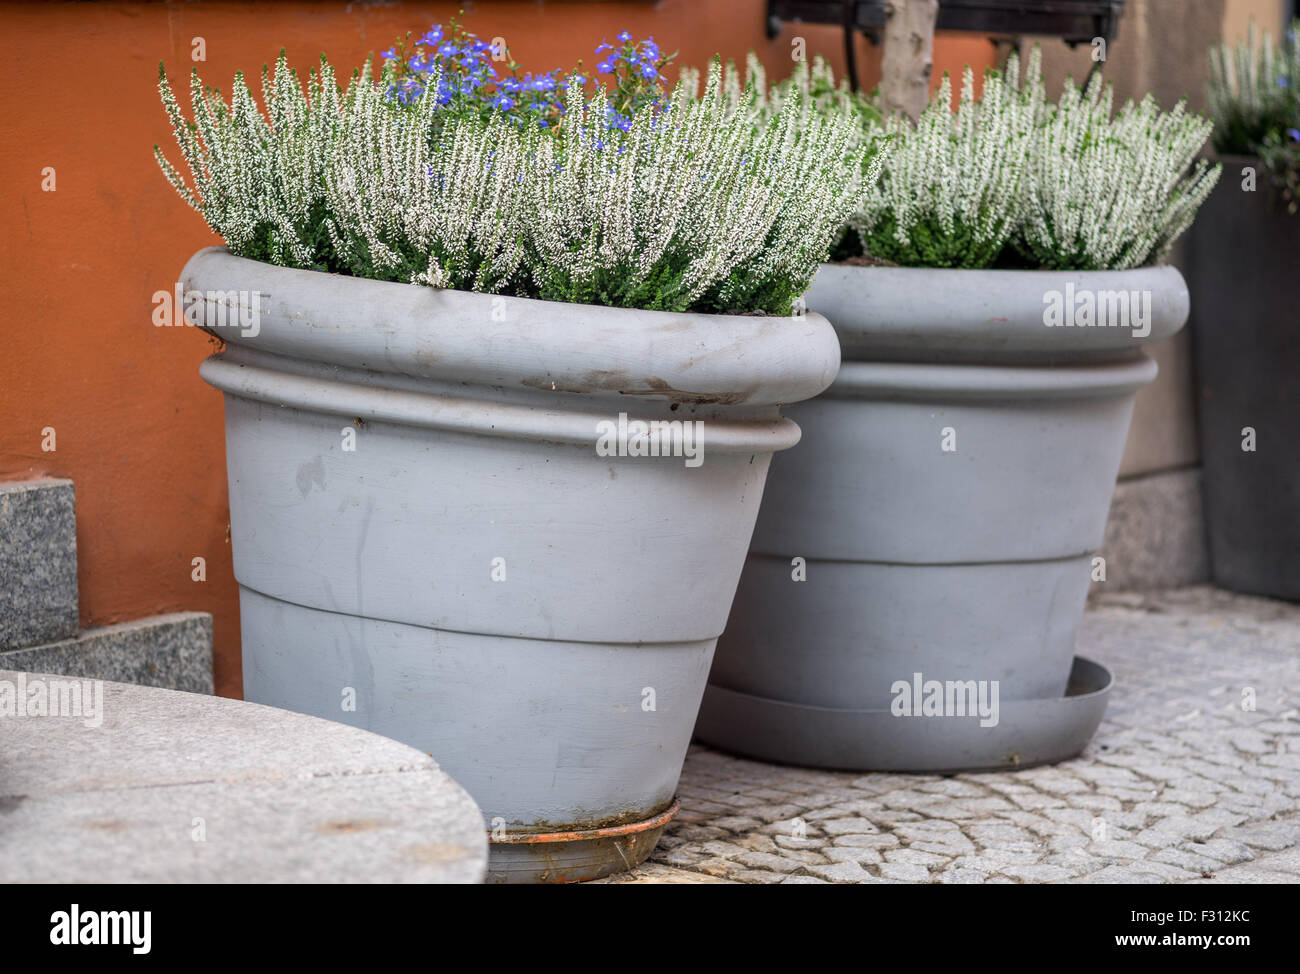 White heather blooming in the big ceramic flower pots Stock Photo